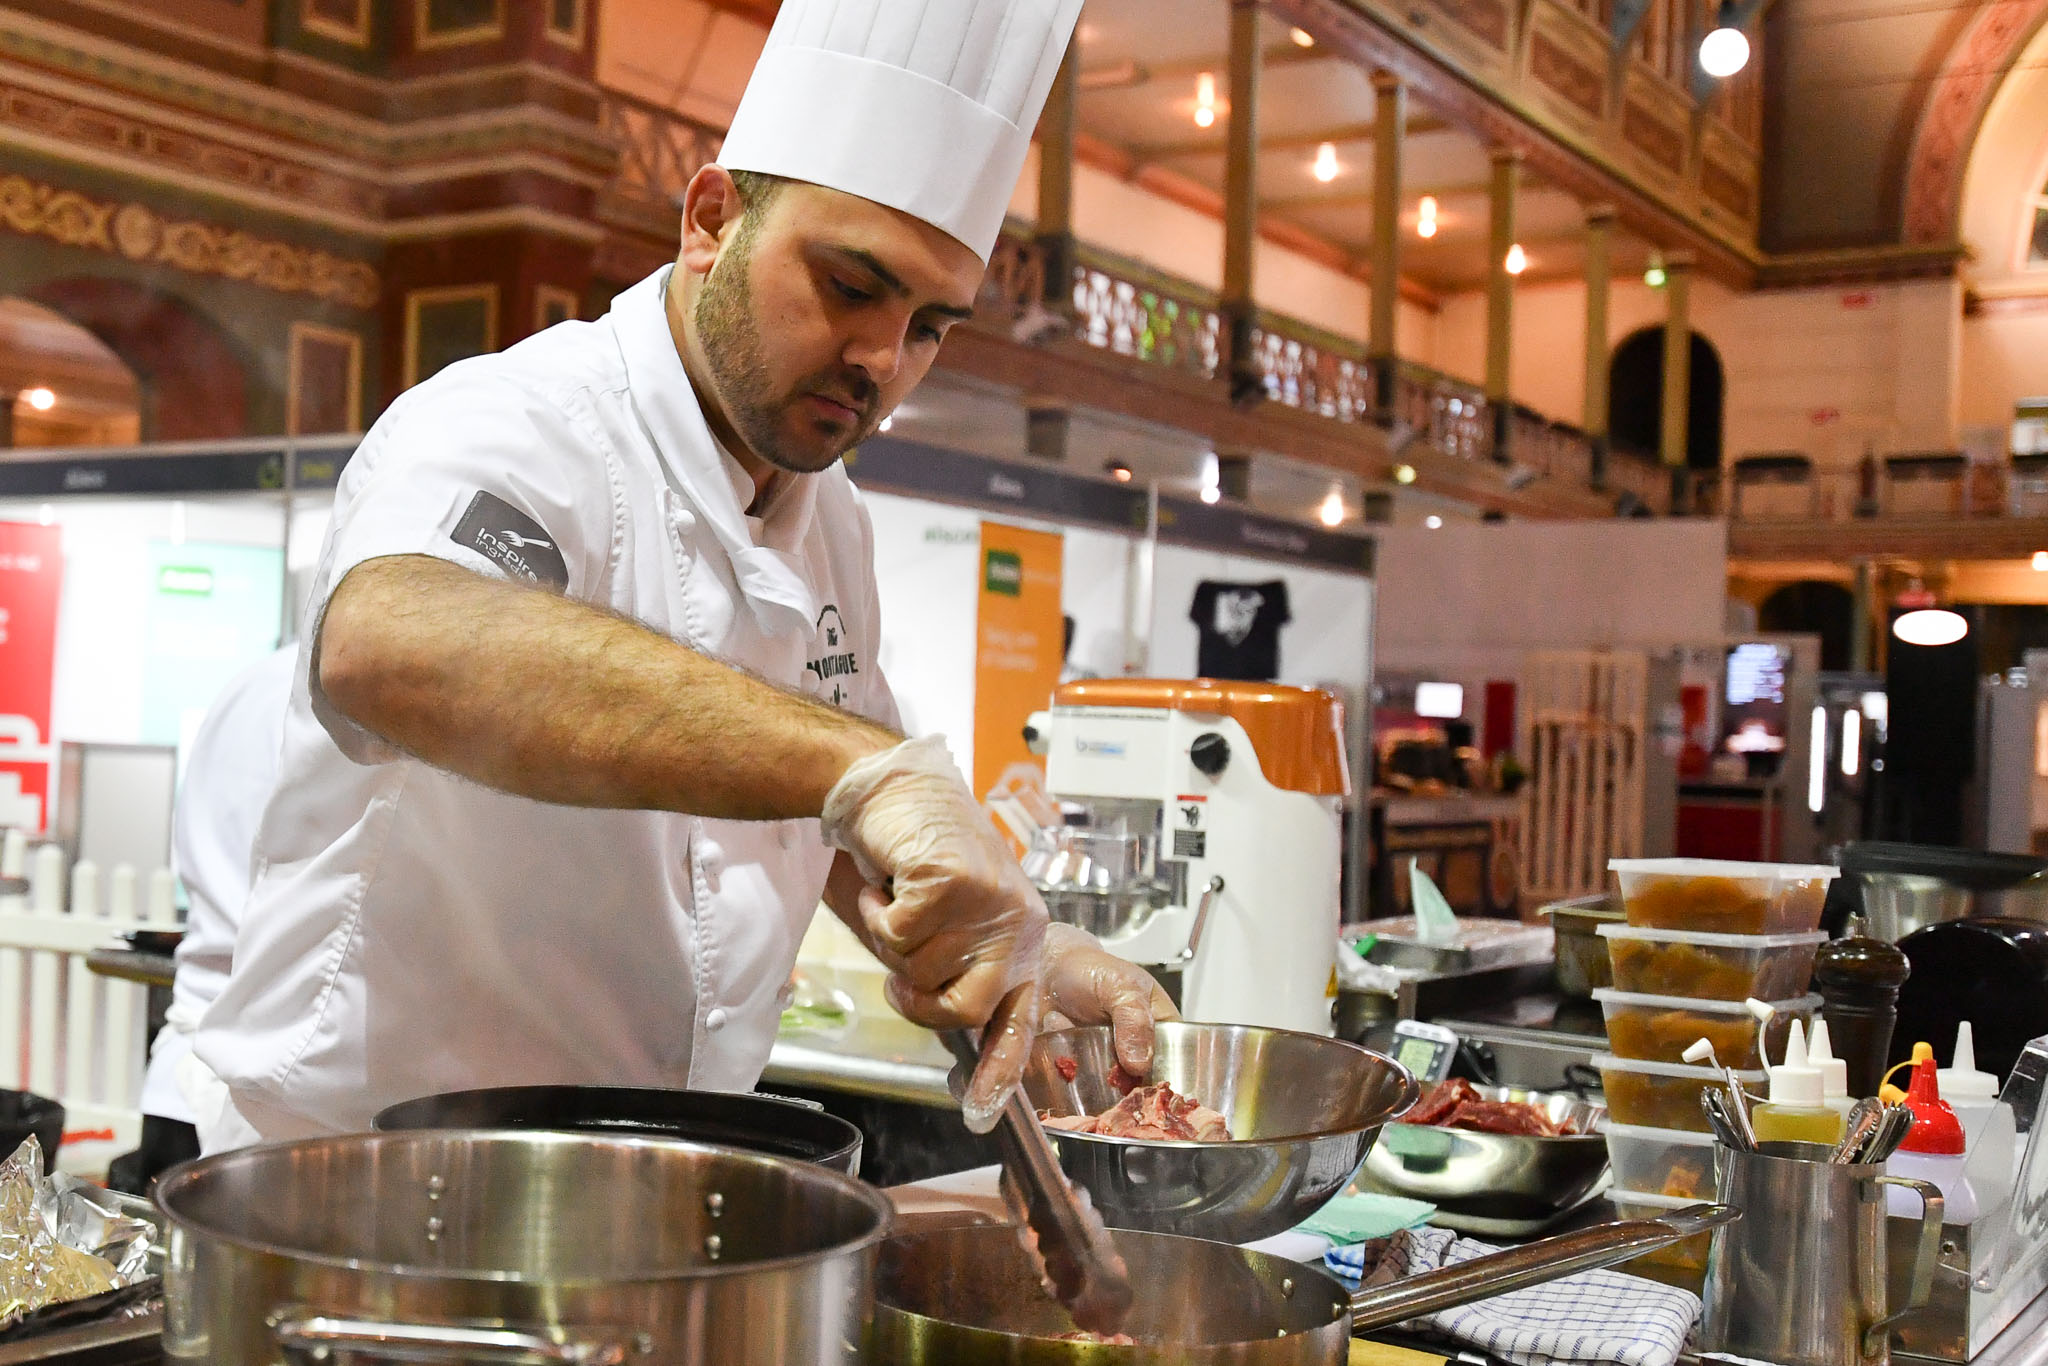 Melbourne, 30 May 2017 - Daniel Soto of the Montague Hotel in South Melbourne prepares the meat at the Australian selection trials of the Bocuse d'Or culinary competition held during the Food Service Australia show at the Royal Exhibition Building in Melbourne, Australia. Photo Sydney Low